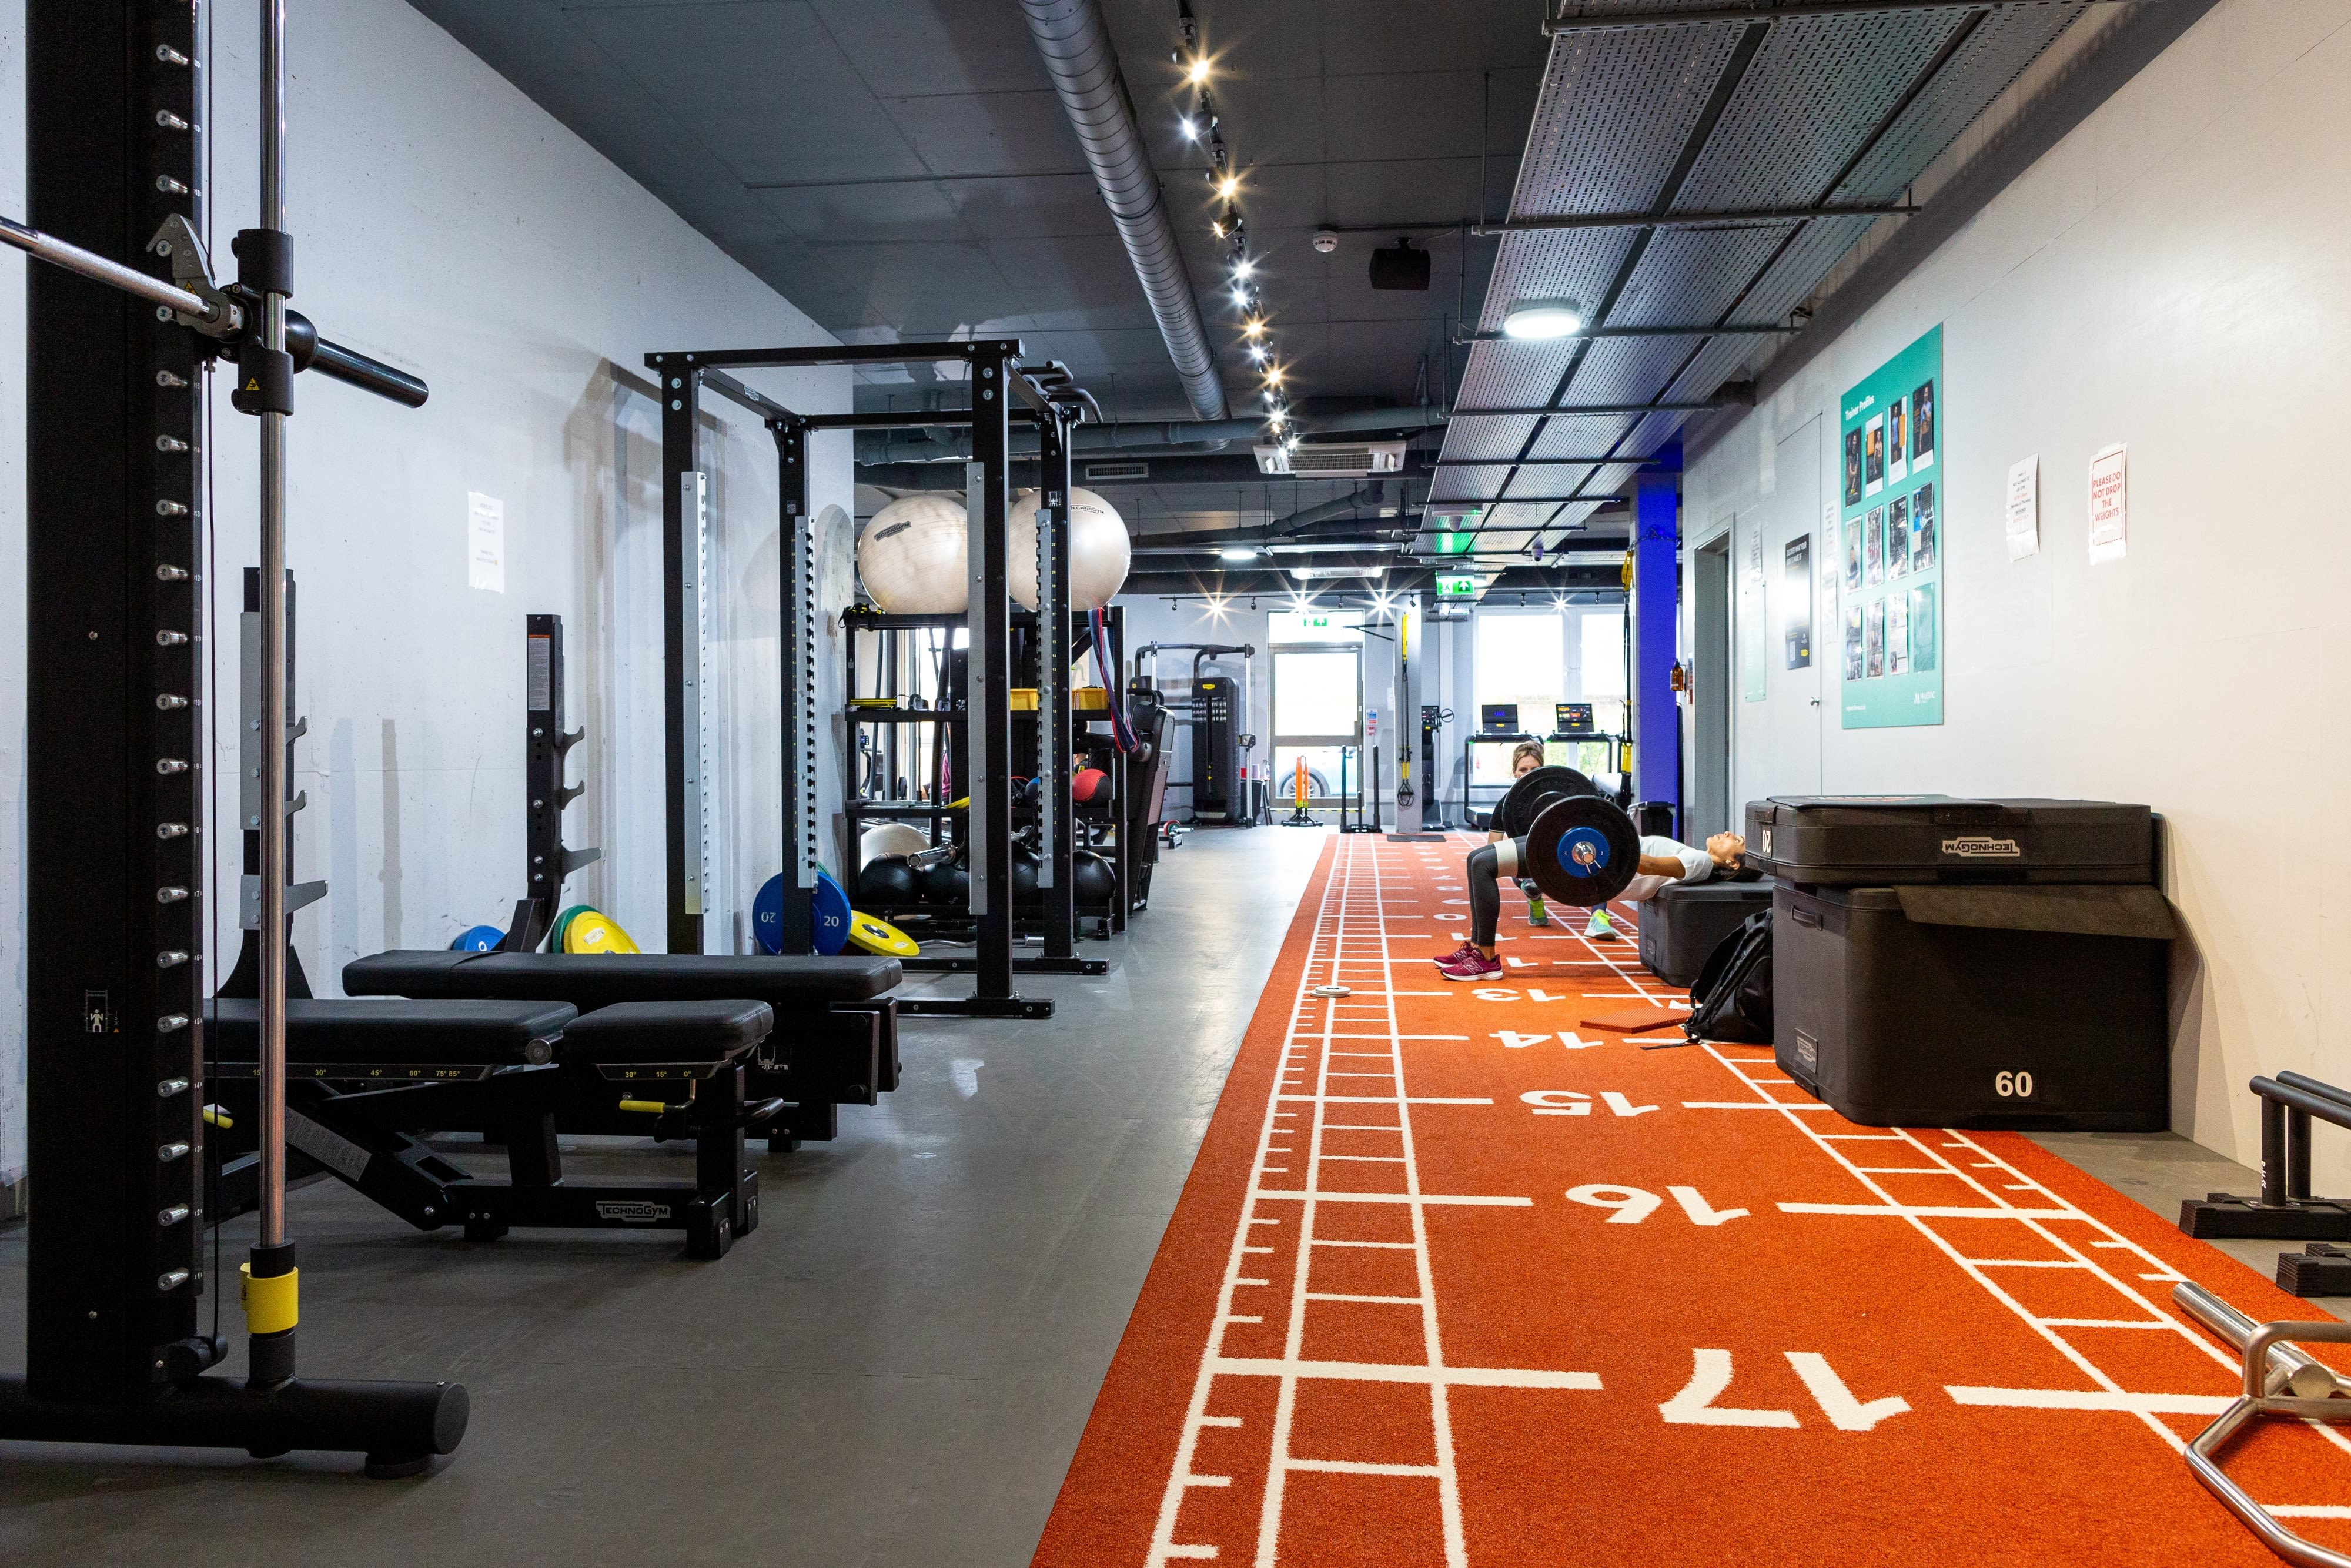 Majestic Fitness: Read Reviews And Book Classes On Classpass